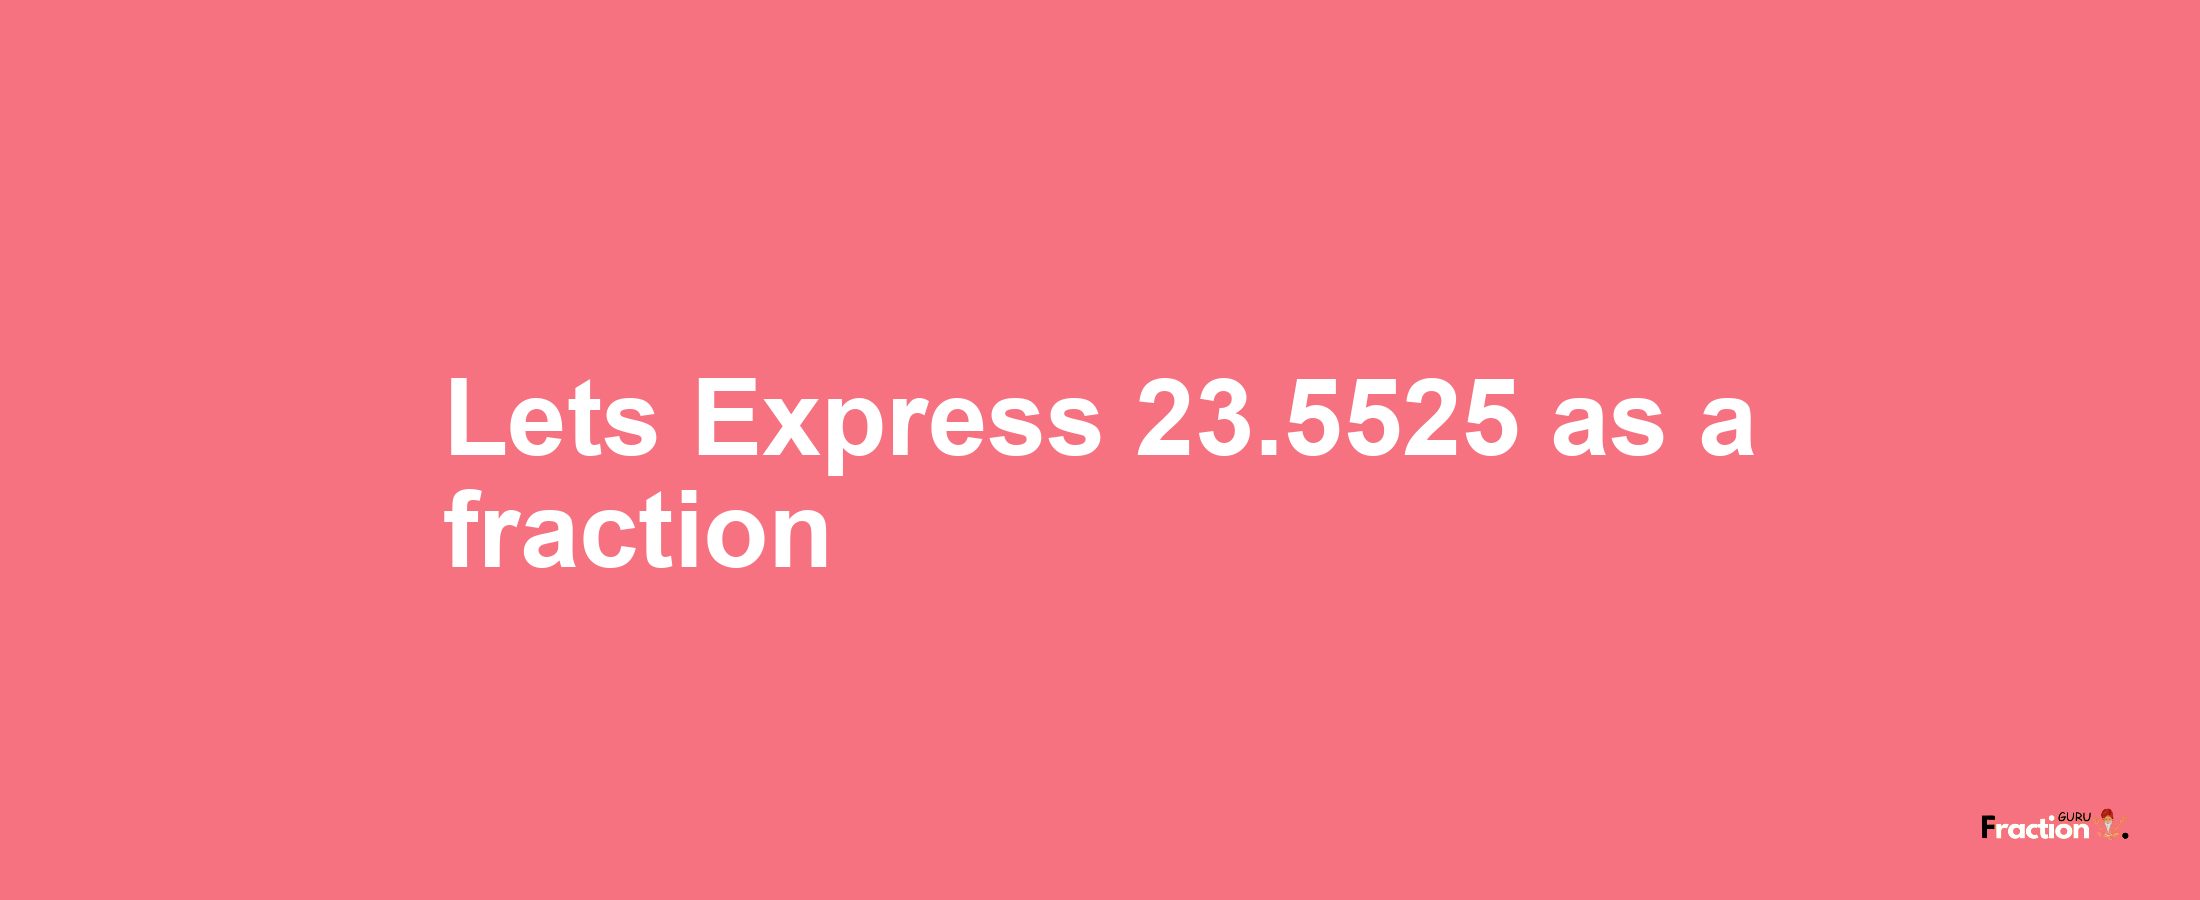 Lets Express 23.5525 as afraction